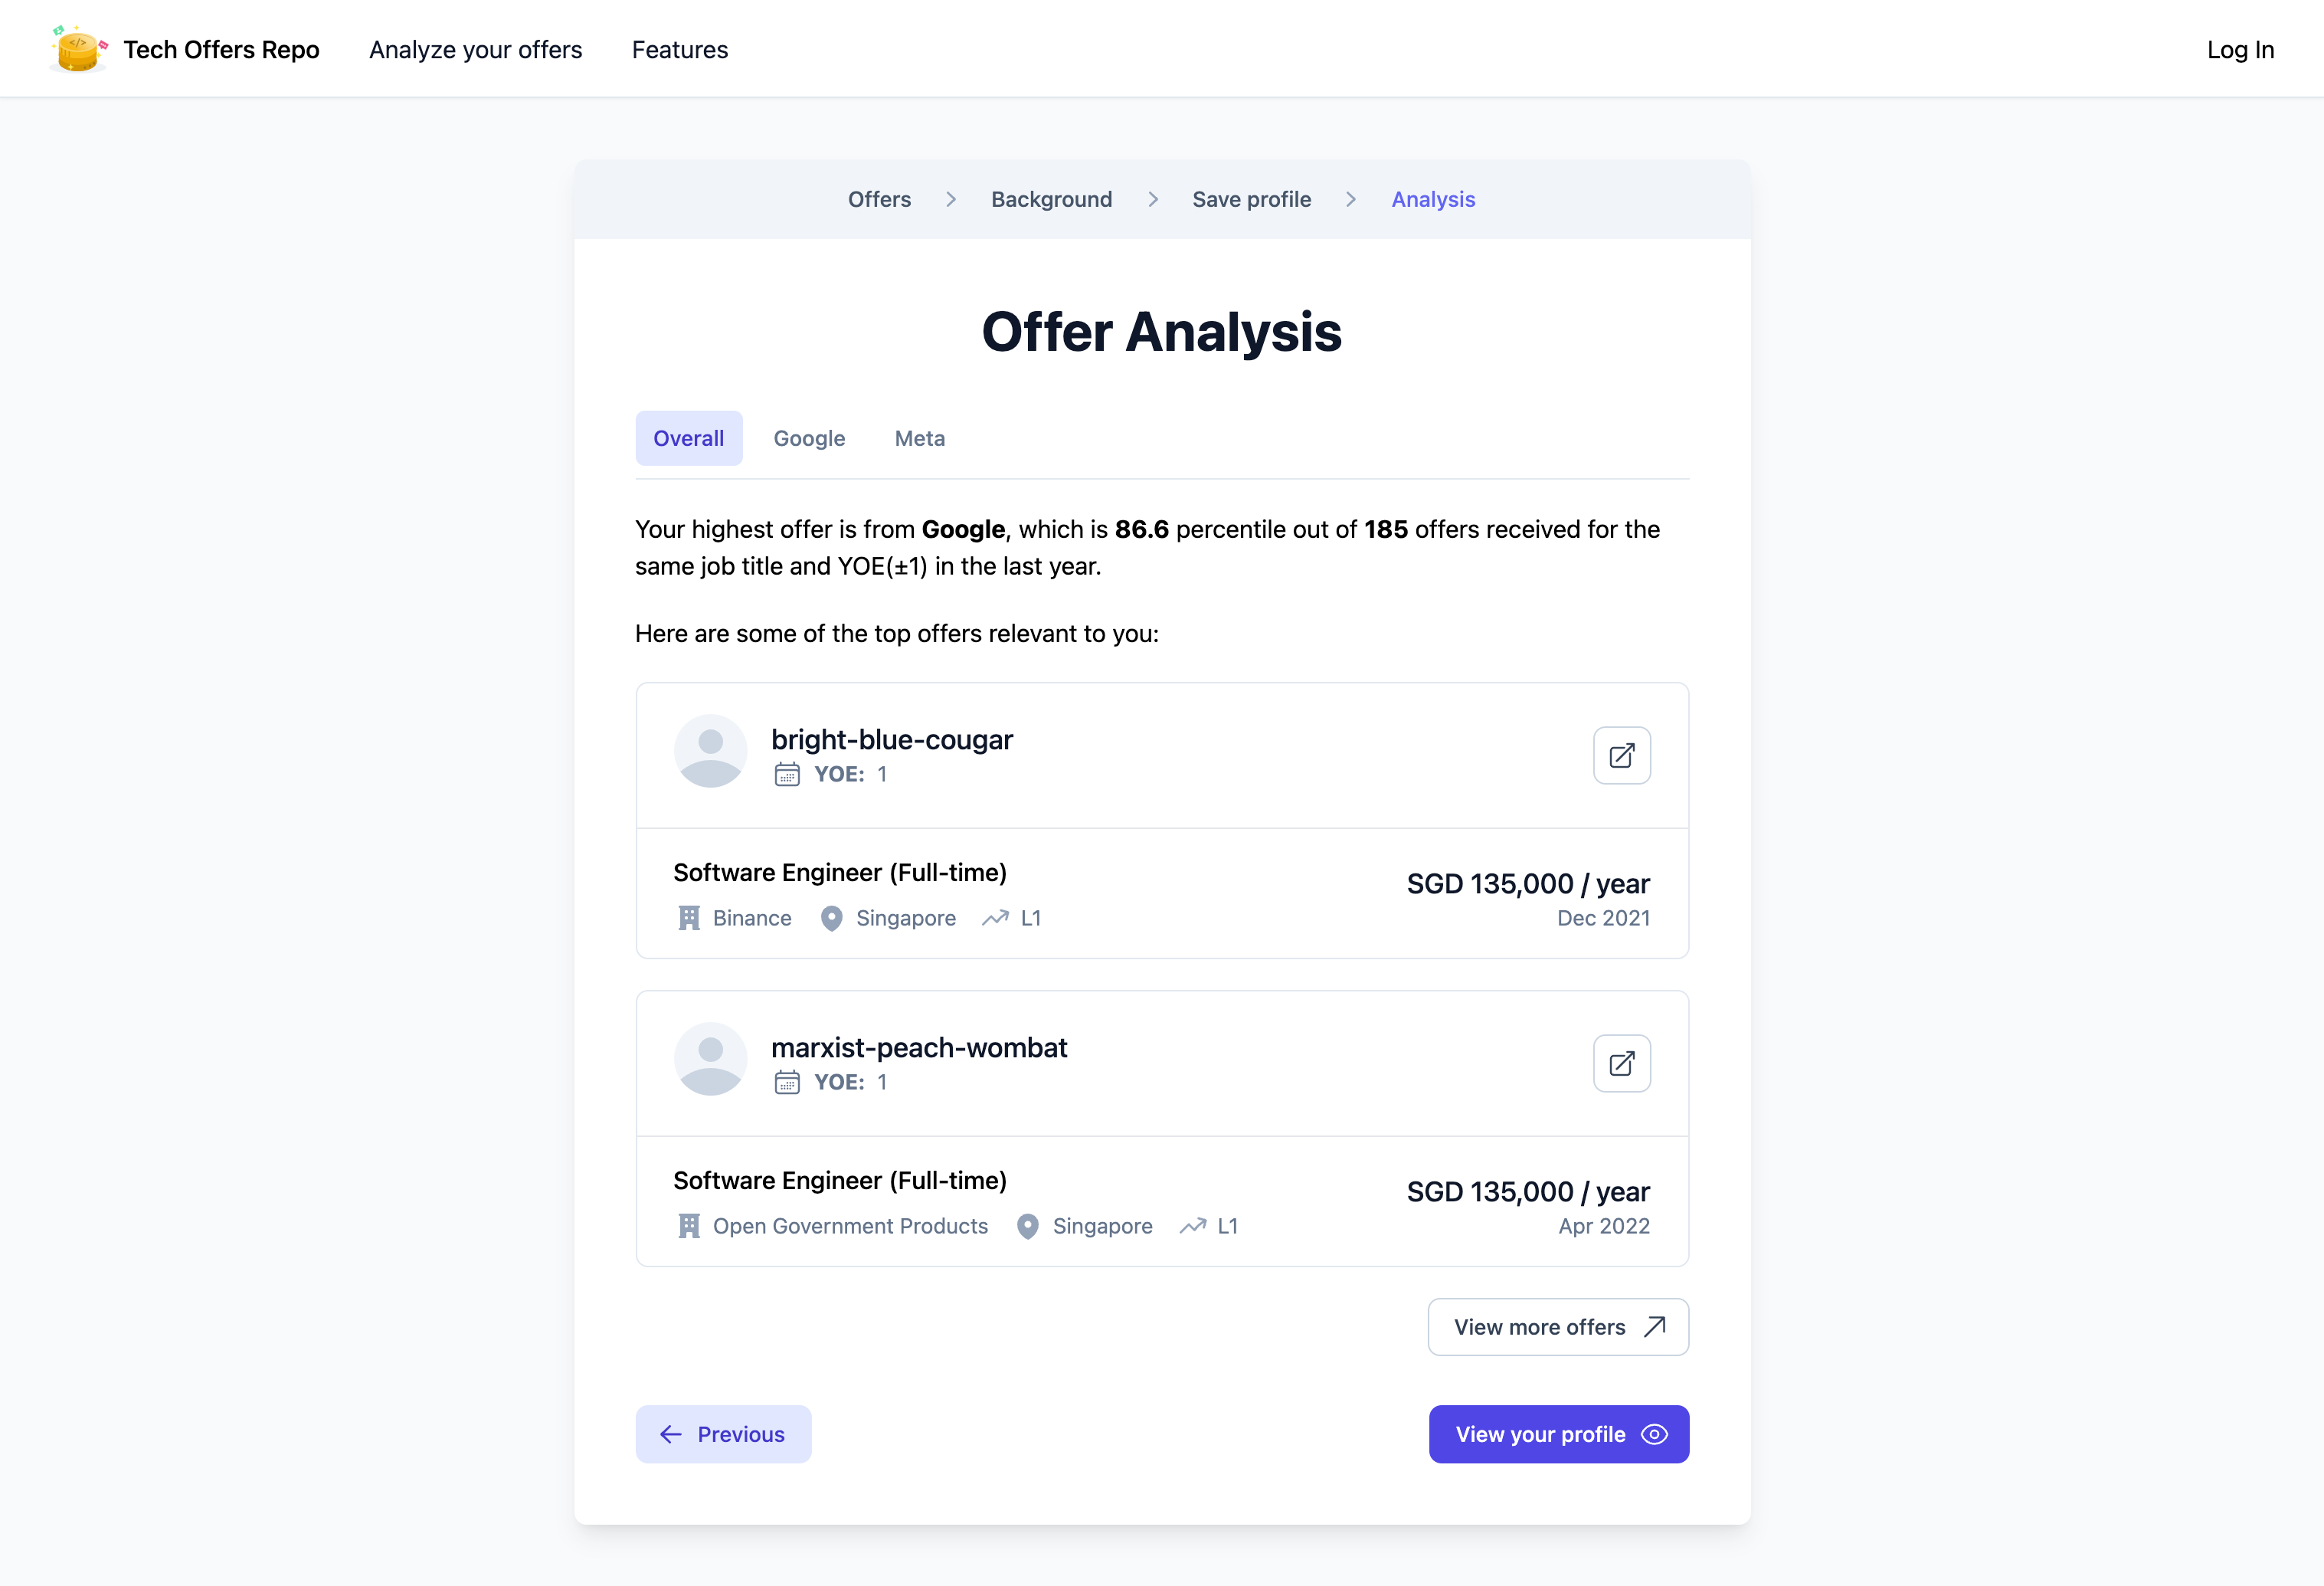 Offers analysis page